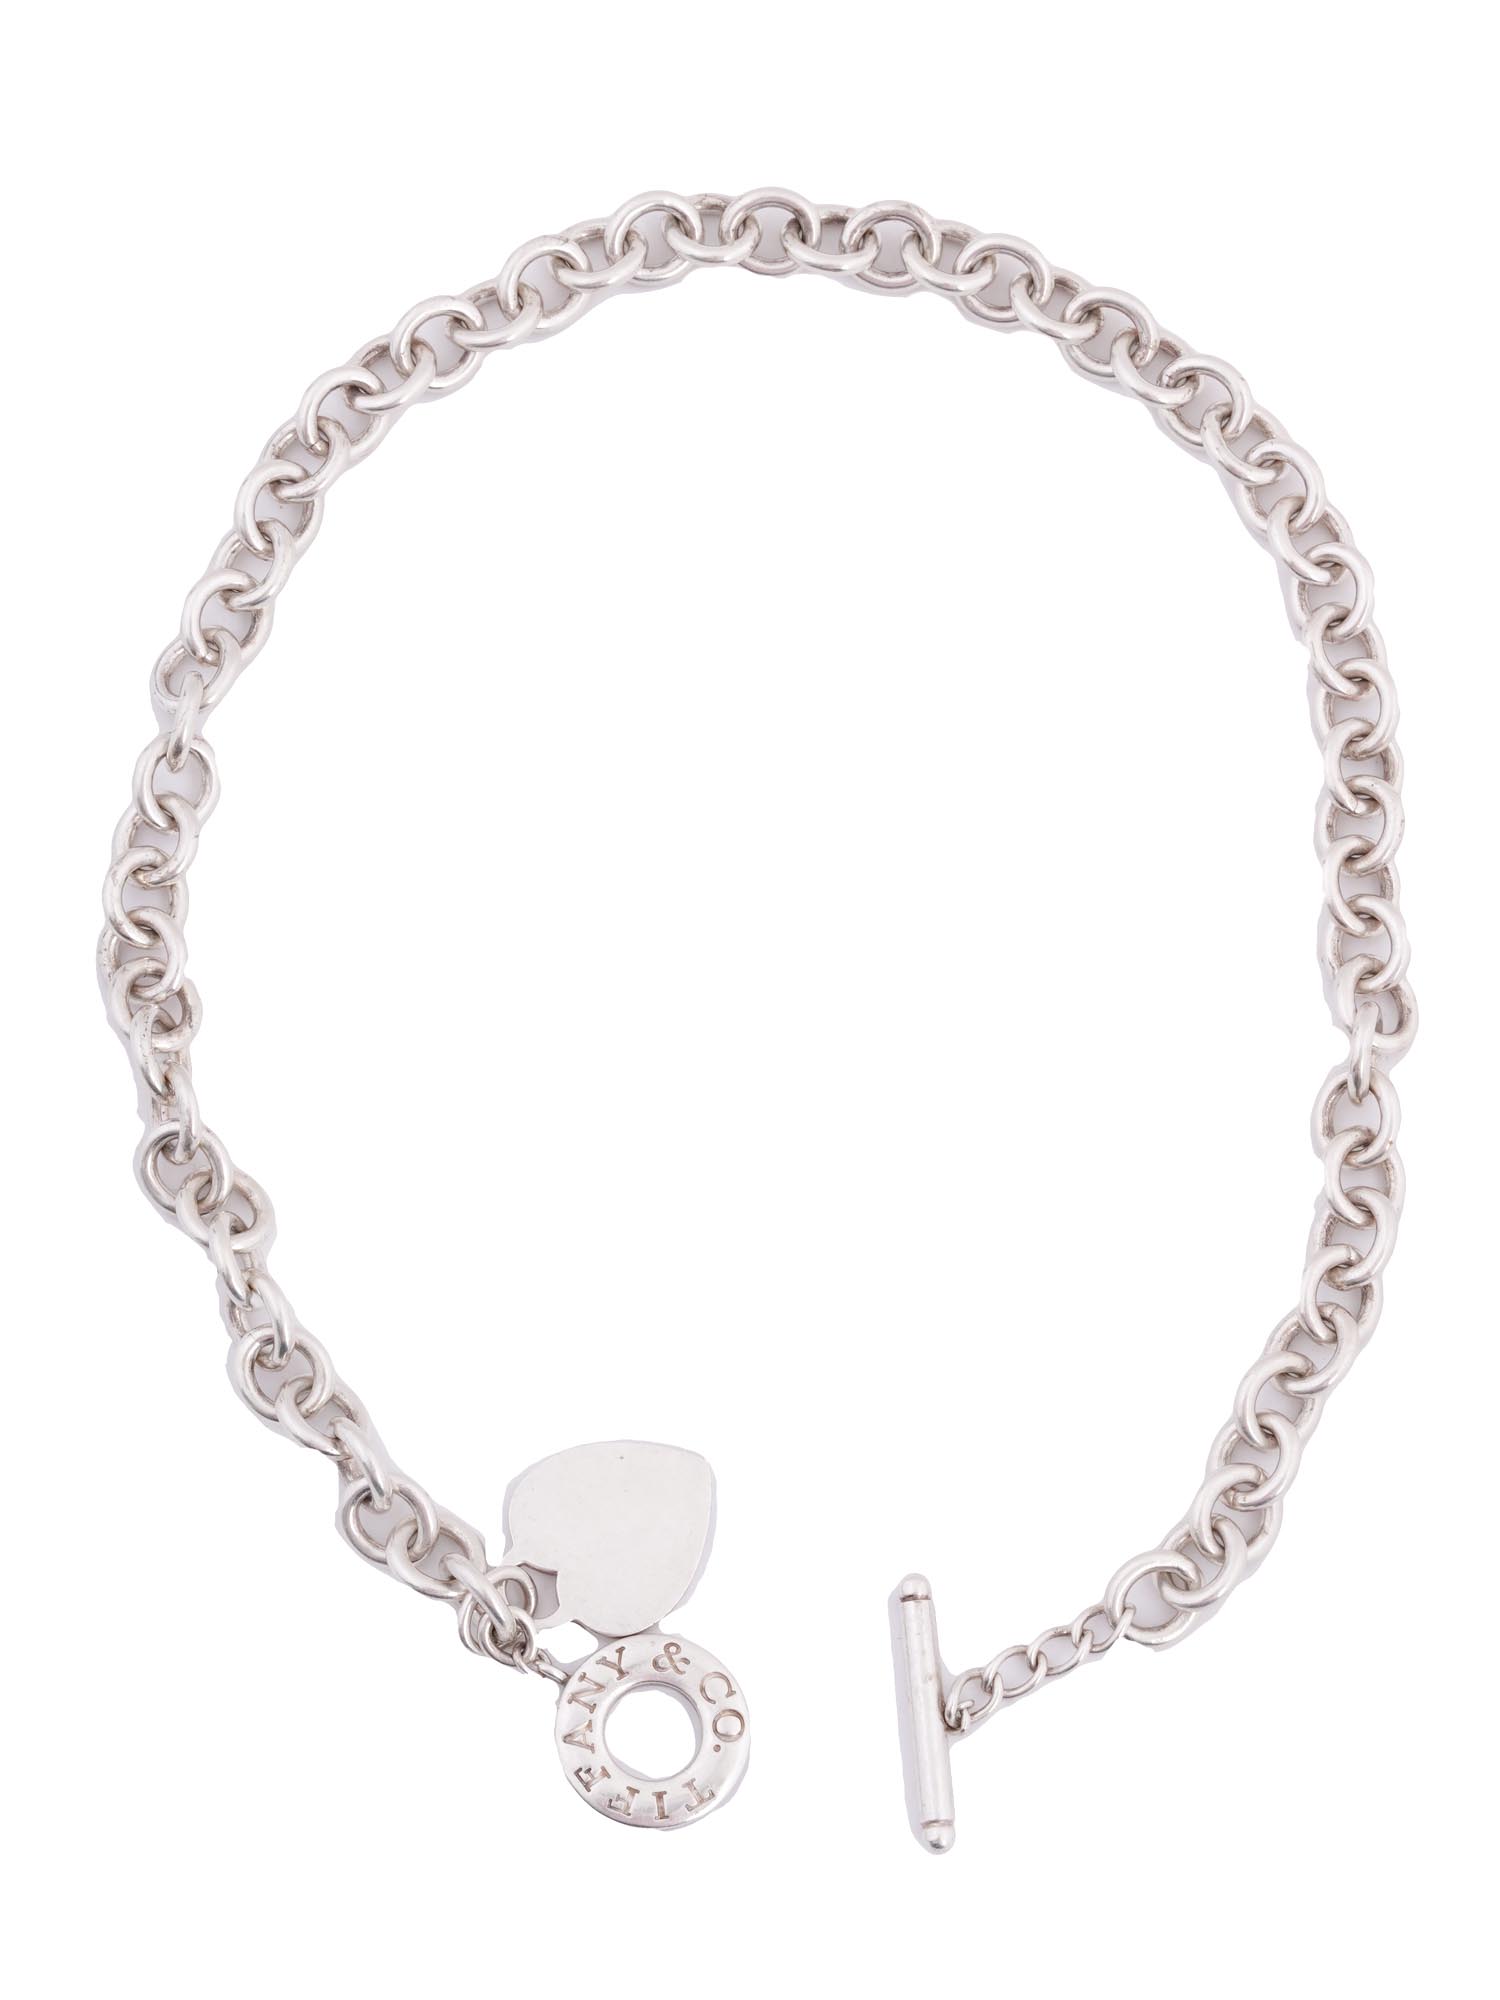 TIFFANY STERLING SILVER NECKLACE WITH HEART CHARM PIC-3